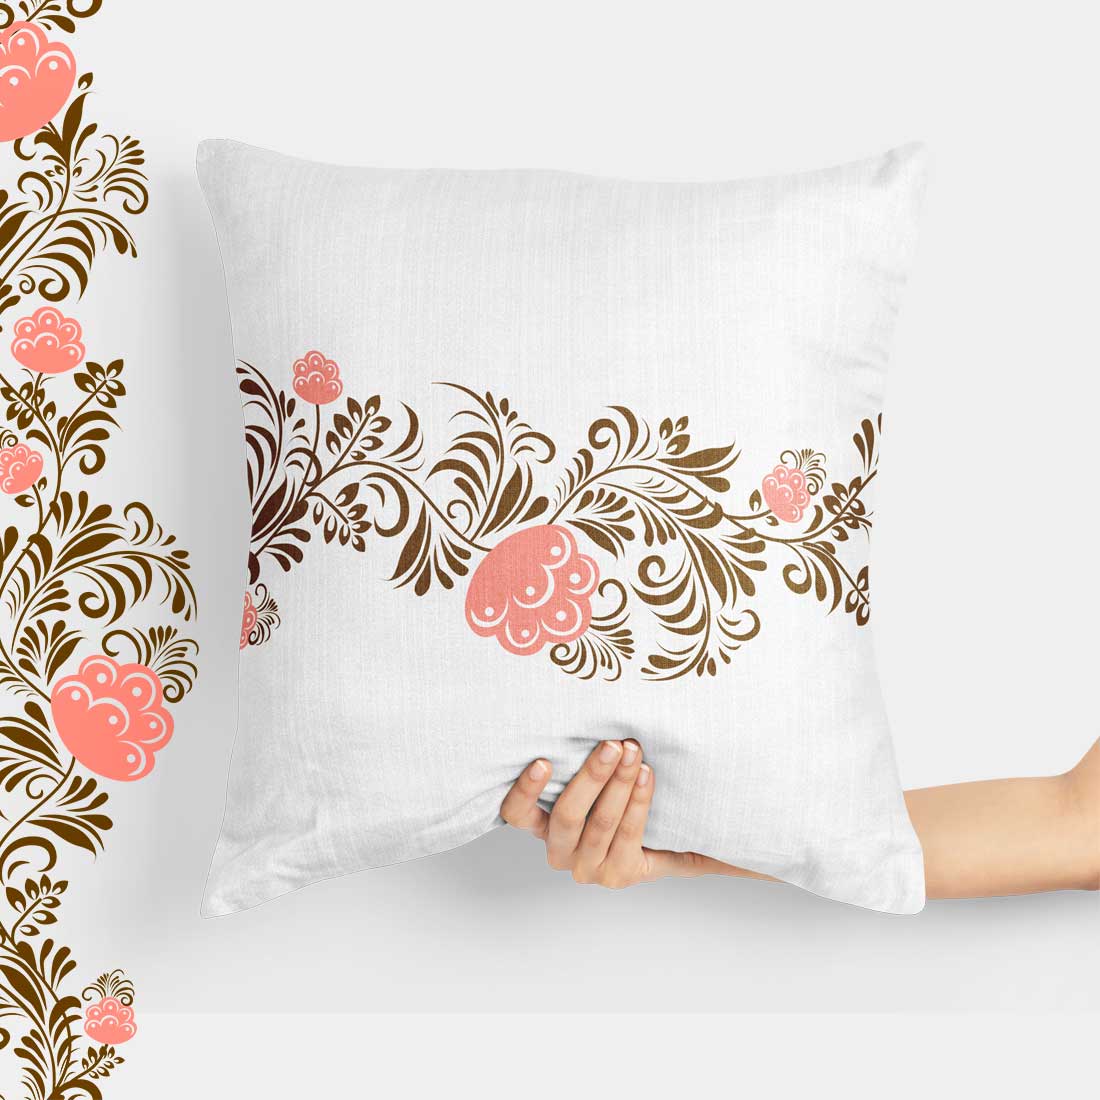 Person holding a pillow with a floral design on it.